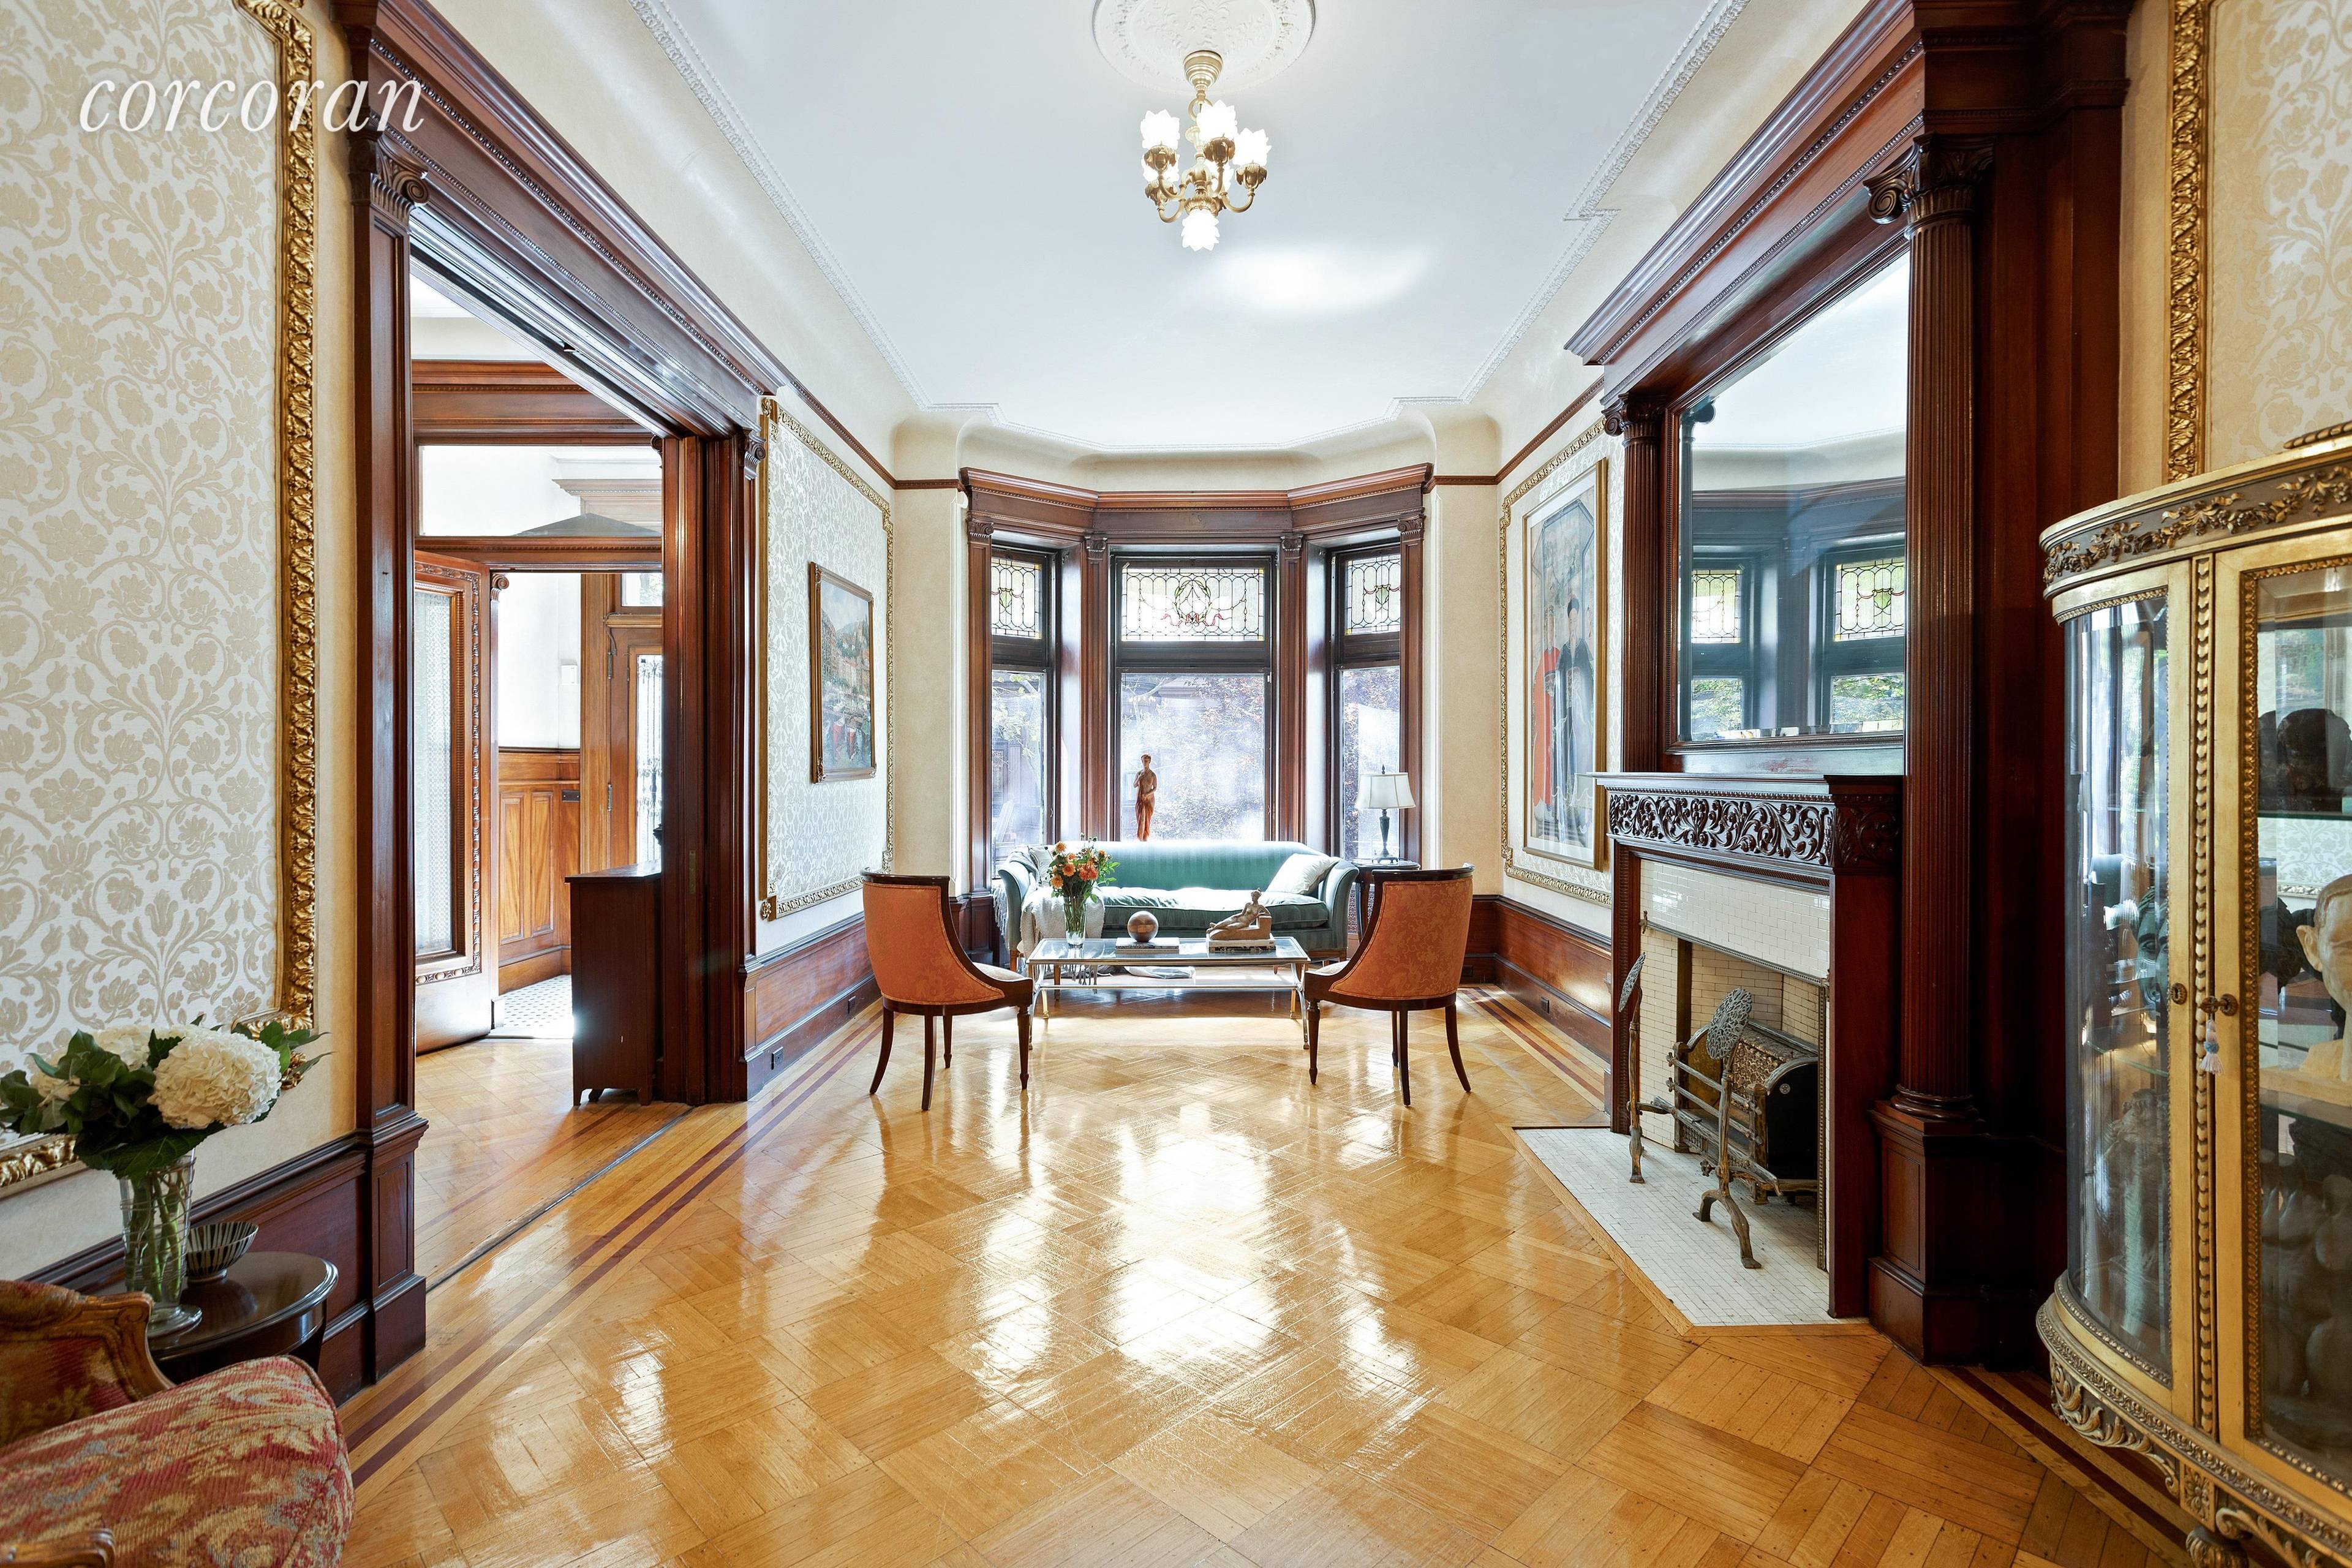 793 Carroll StreetLocated on one of the most coveted tree lined streets in Park Slope, this Neoclassically influenced, 20 foot wide limestone has it all location, size, and gorgeous original ...